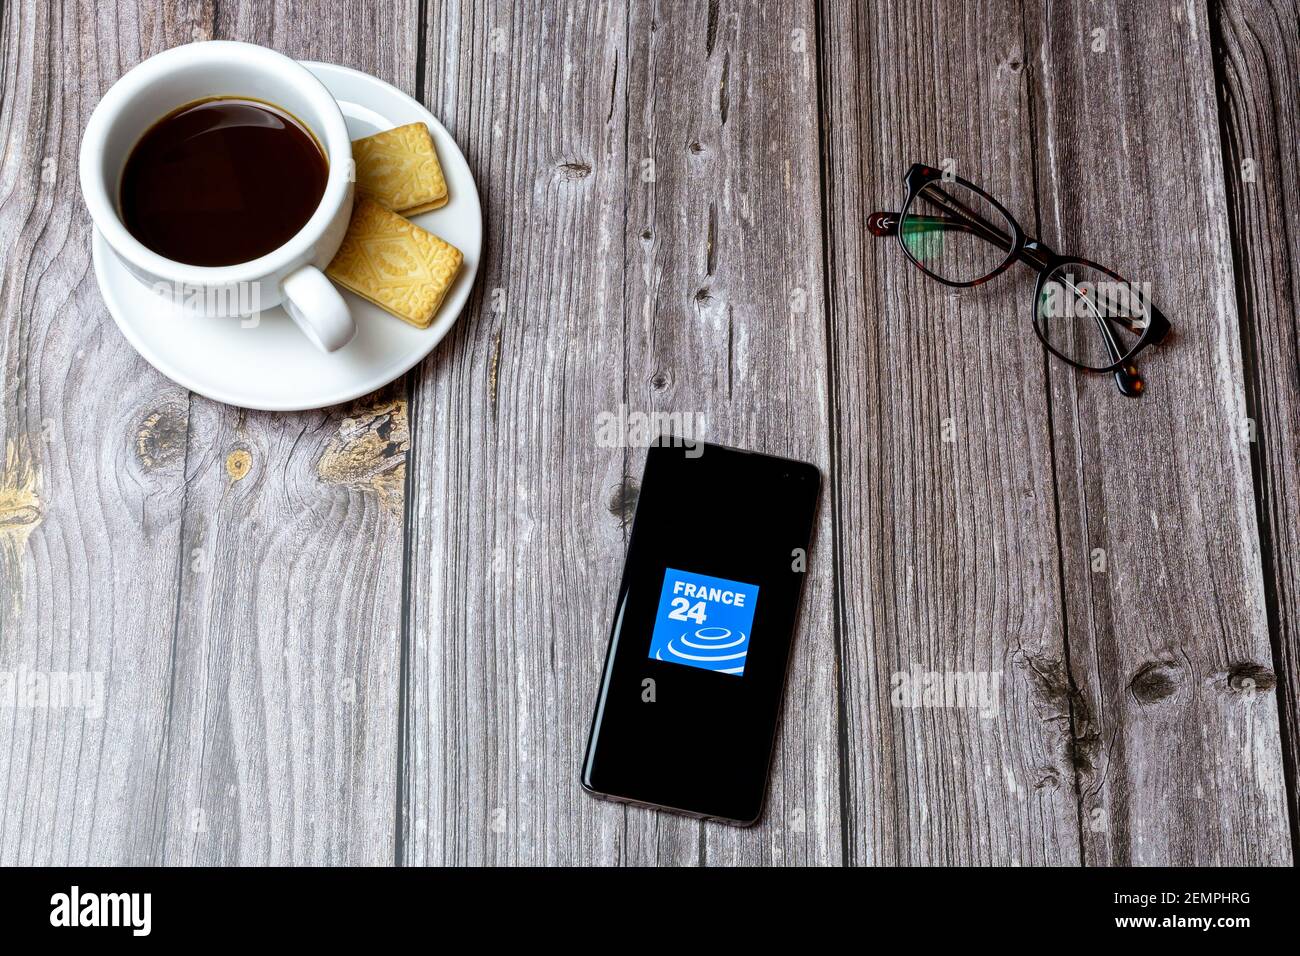 A mobile phone or cell phone on a wooden table with the France 24 news app open next to a coffee and glasses Stock Photo